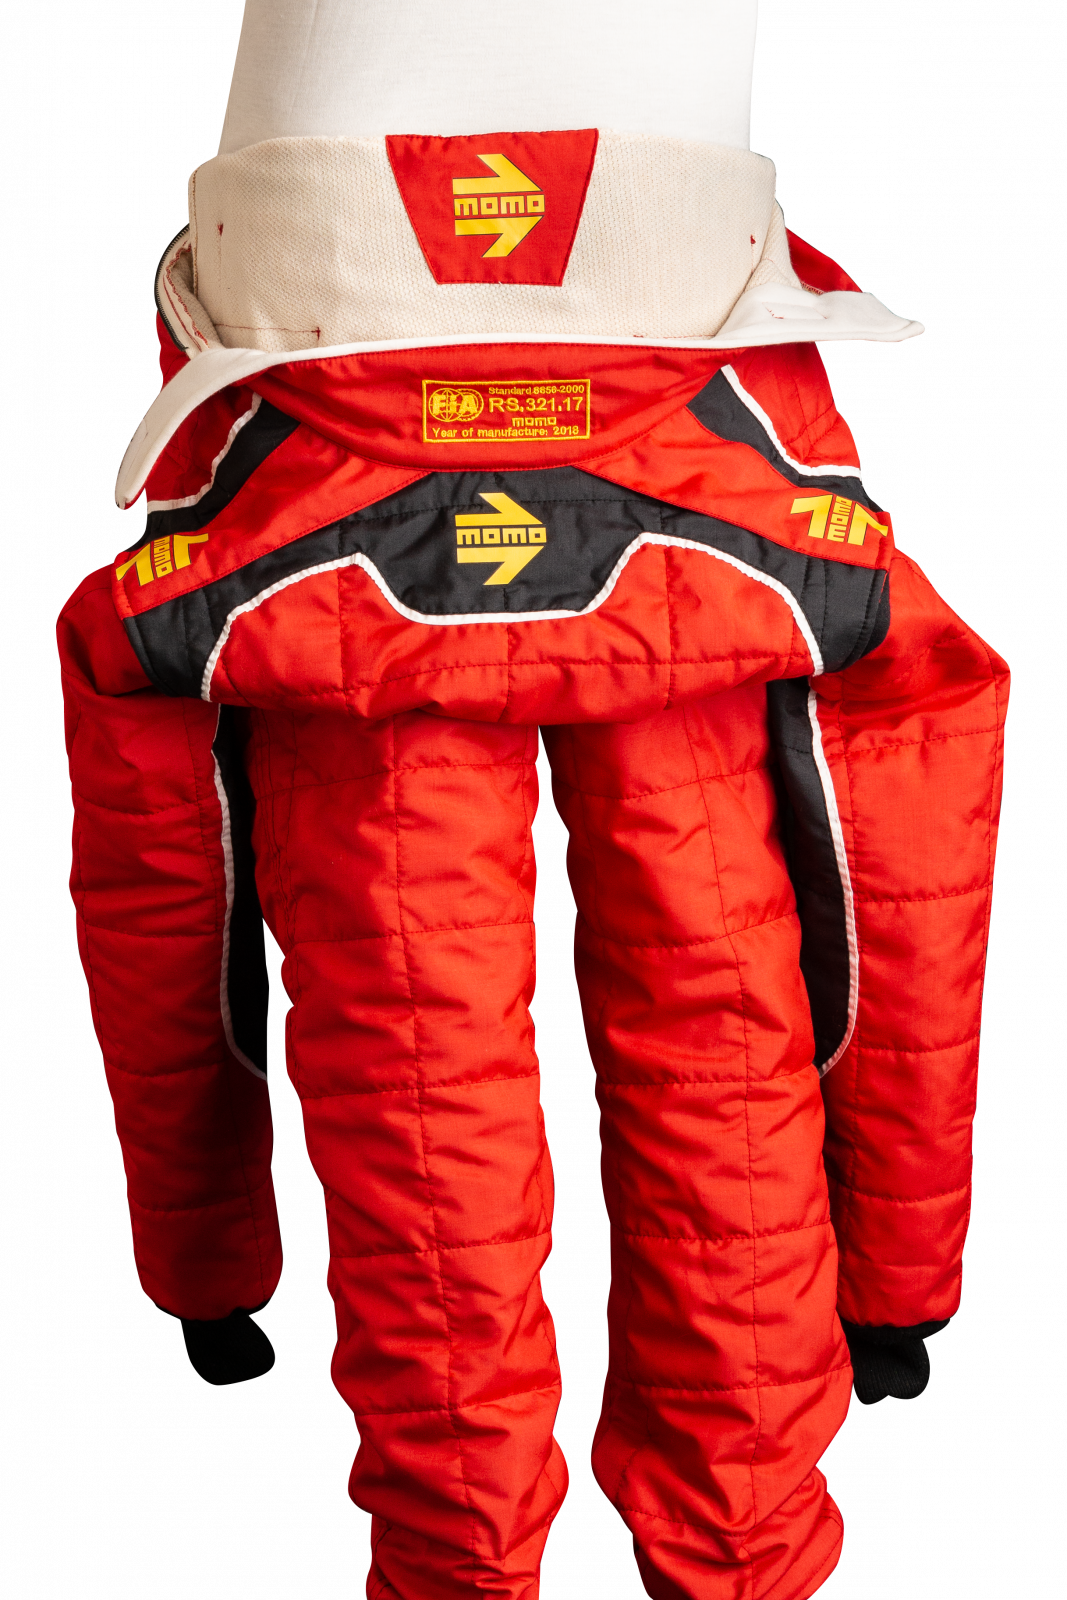 MOMO Corsa Evo Red Size 62 Racing Suit TUCOEVORED62